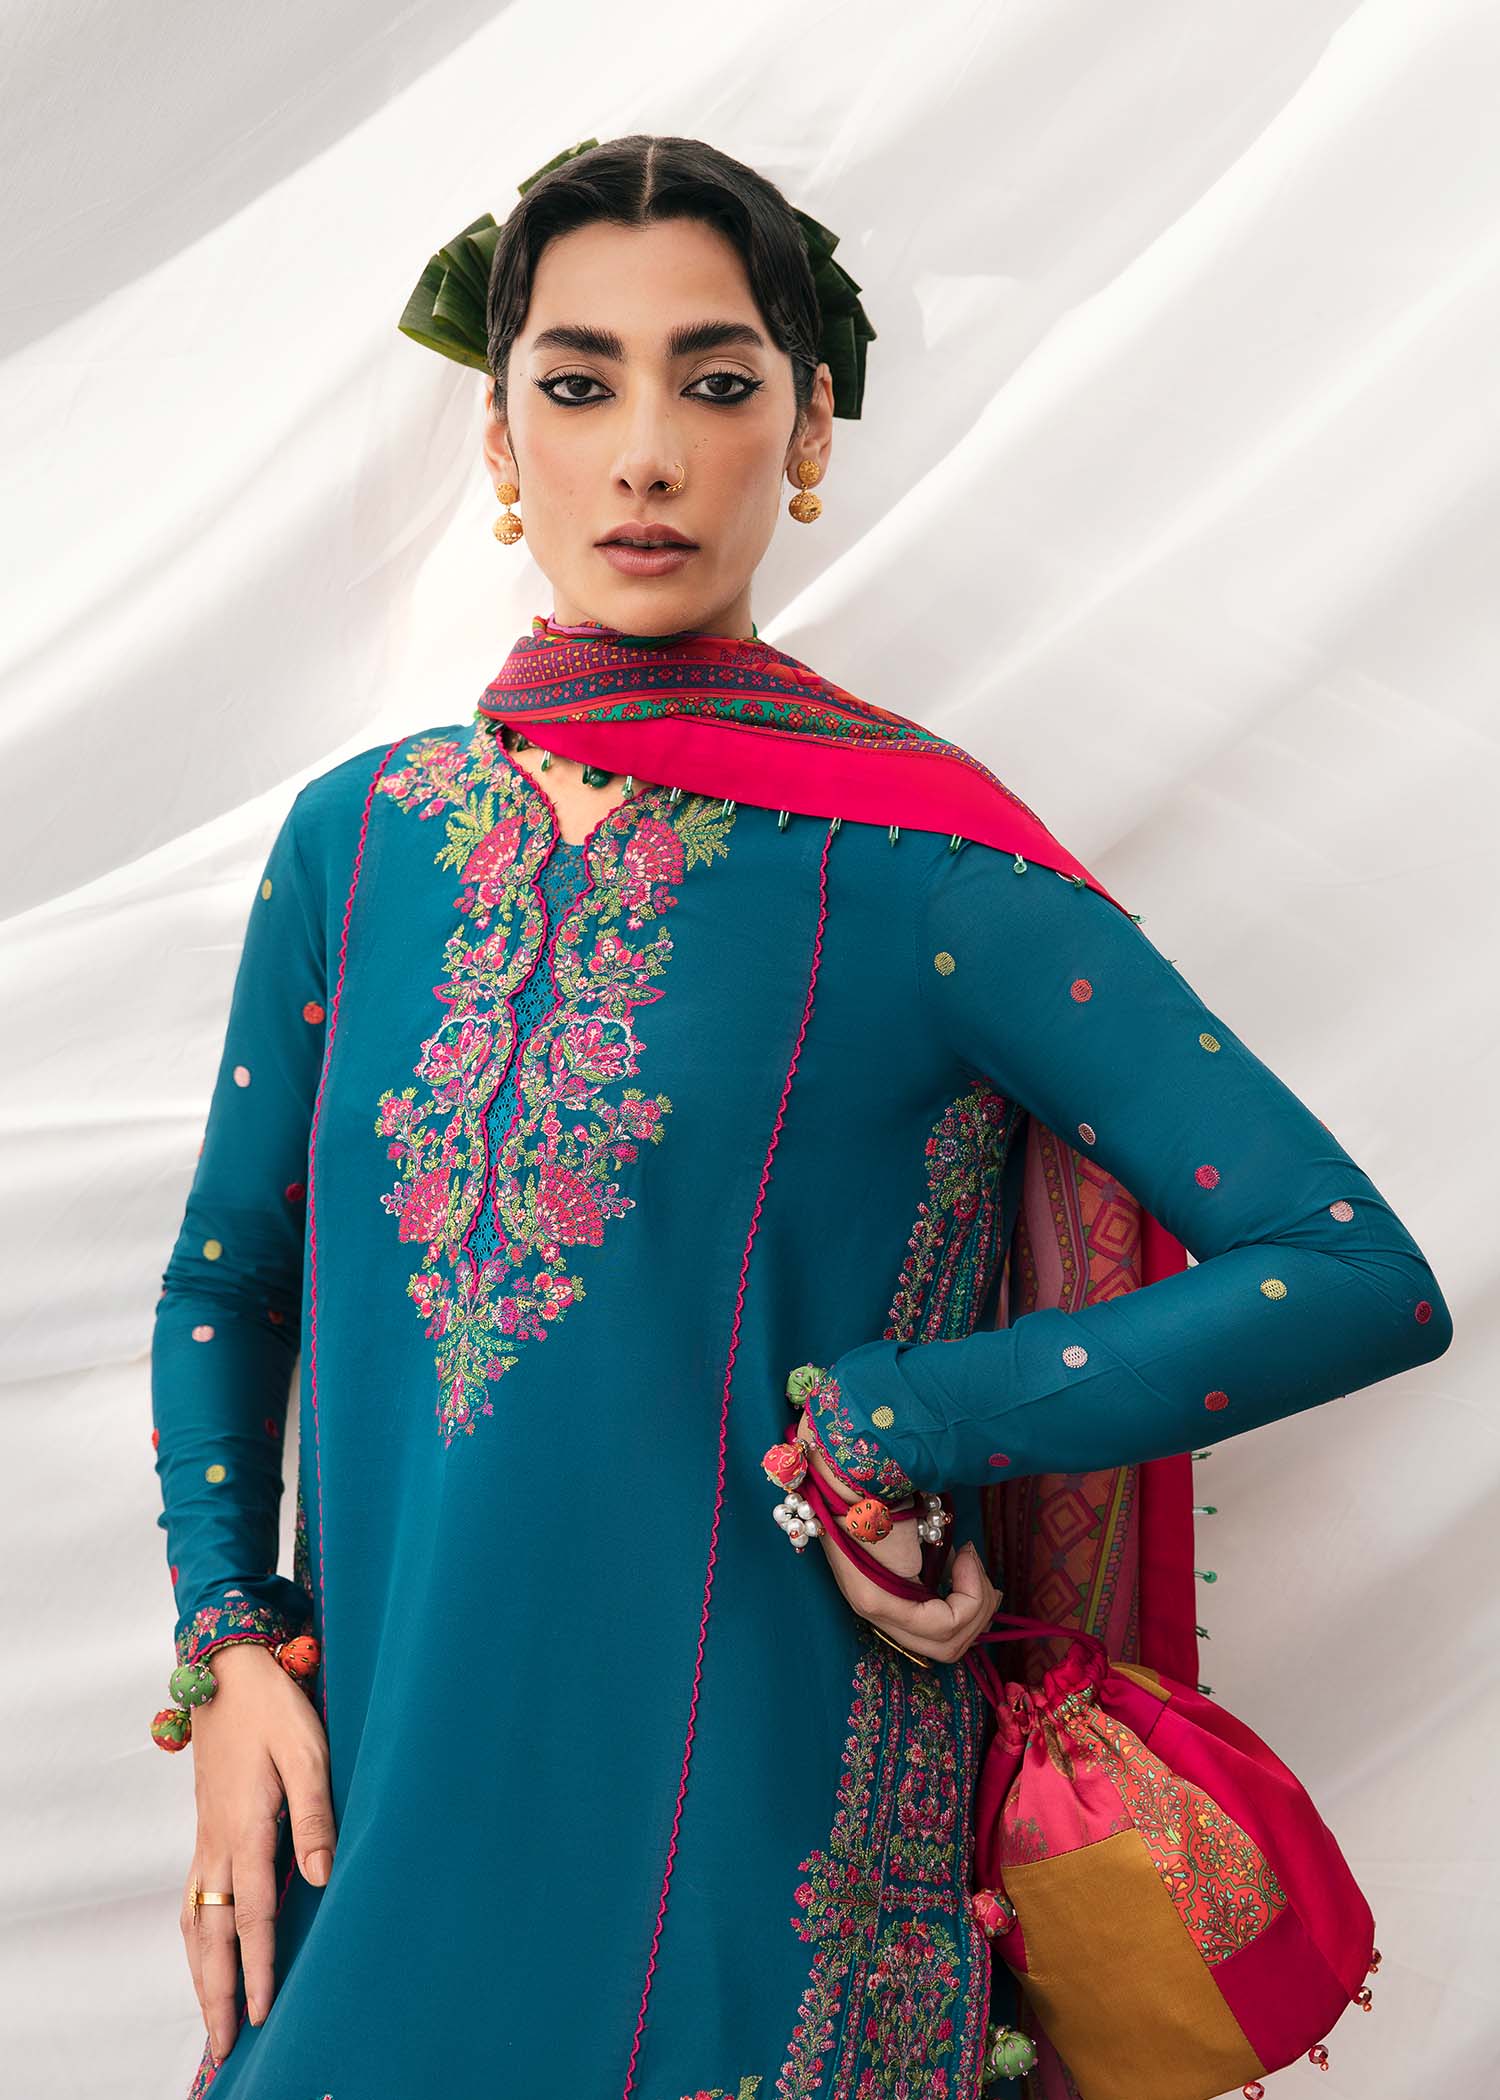 Buy Now - SHAB - Masuam Lawn Collection'23 - Hussain Rehar - Pakistani Designer Clothes - Bridal and Party Dresses - Shahana Collection UK 